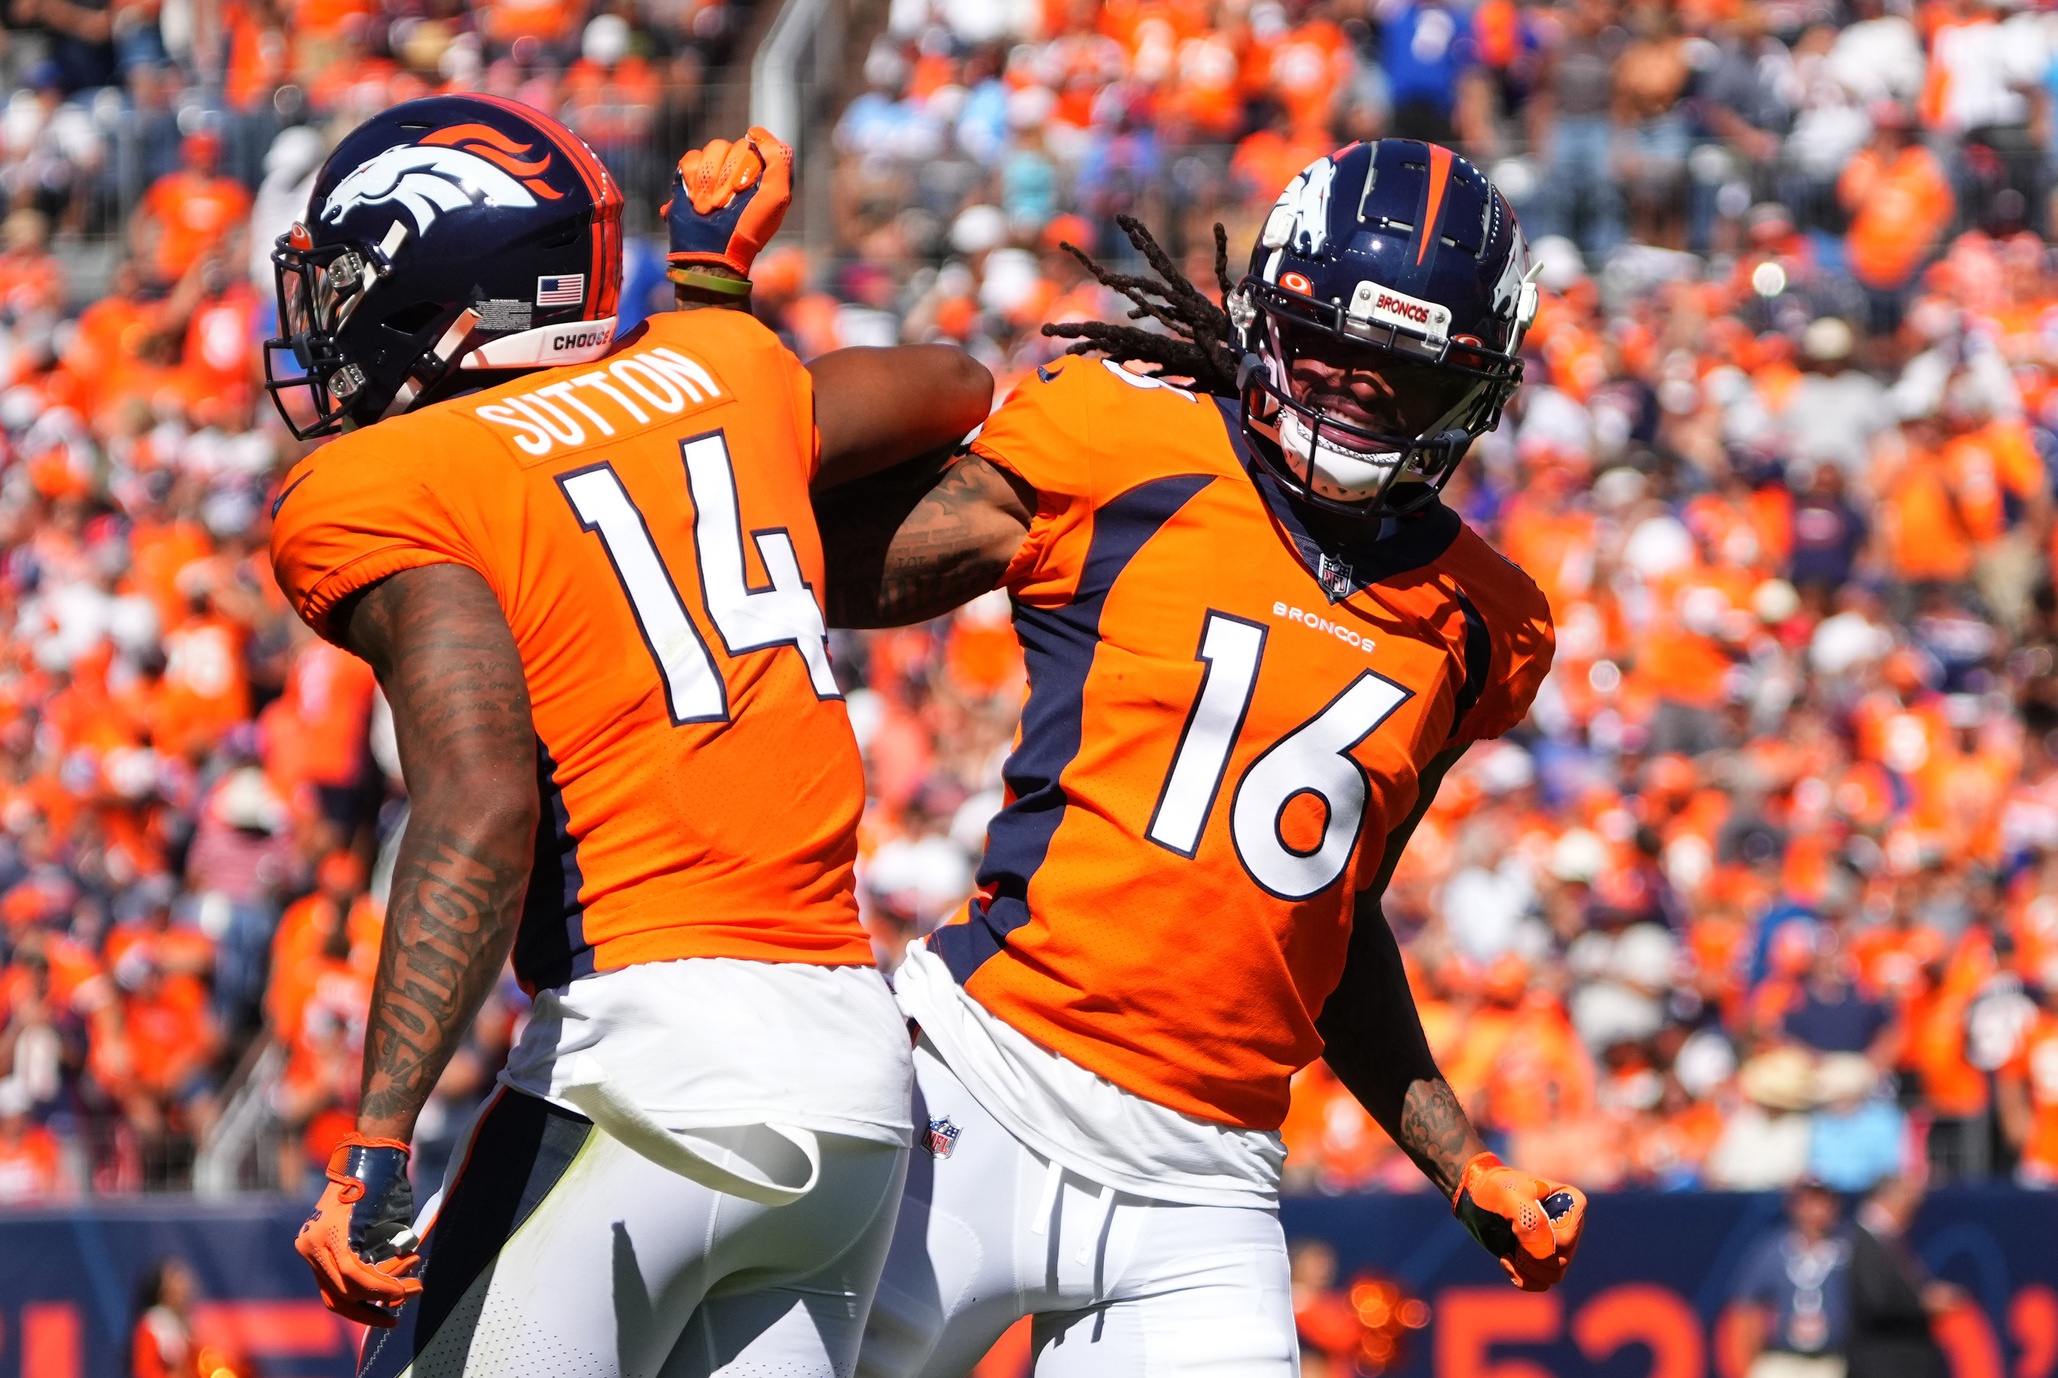 Thursday Night Football NFL DFS Lineup: For Broncos vs. Colts, Can